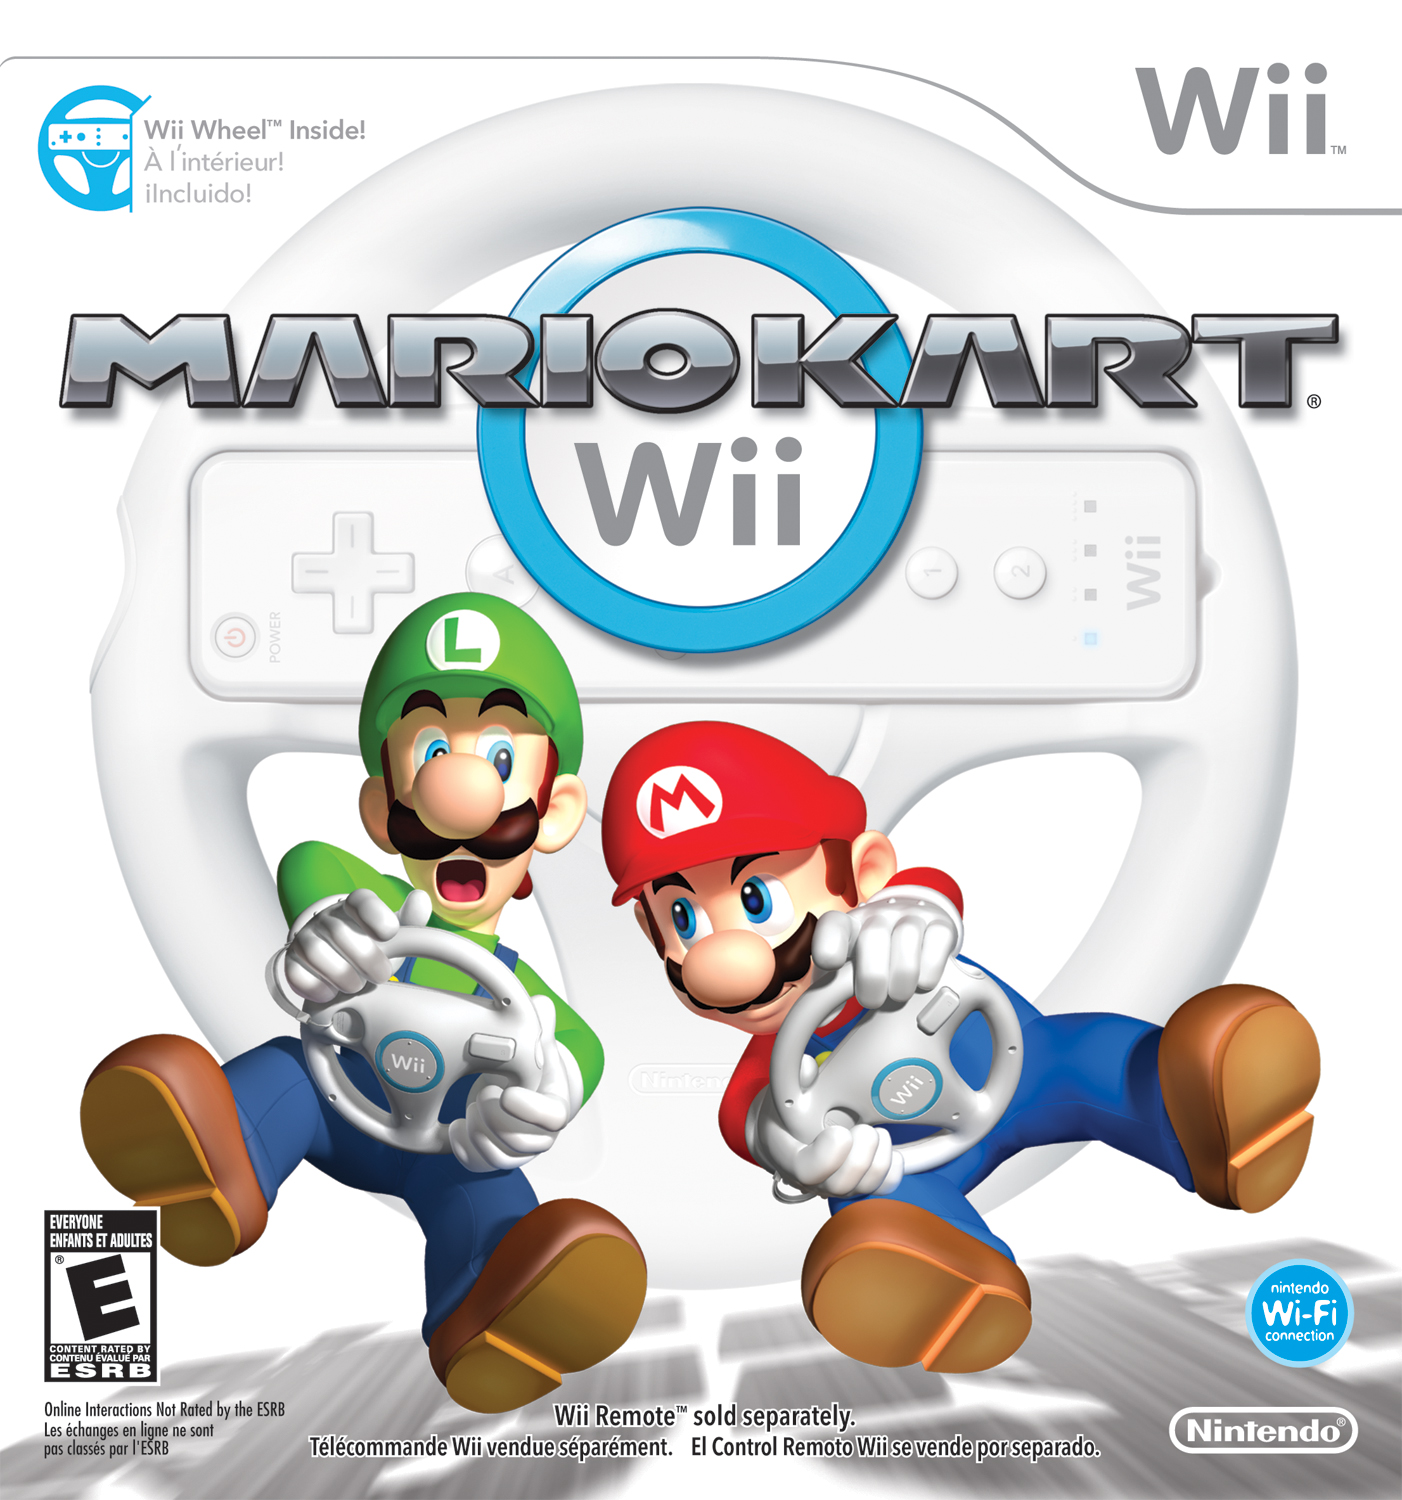 What are some different ways to play Super Mario Kart games?